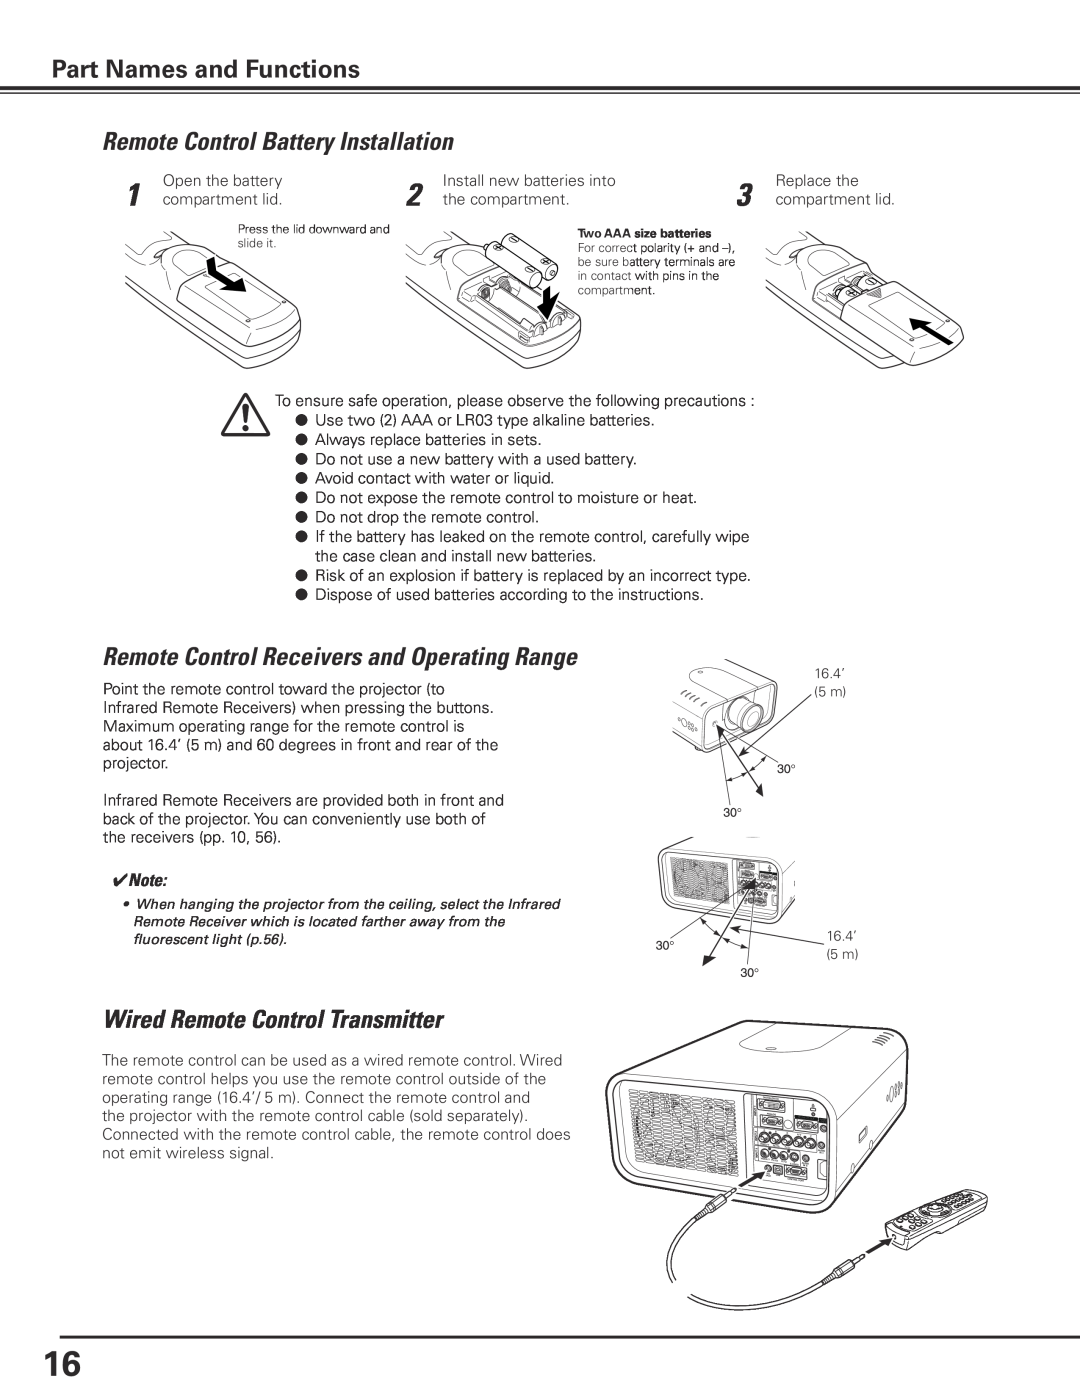 Sanyo PLC-XP200L owner manual Remote Control Battery Installation, Remote Control Receivers and Operating Range 